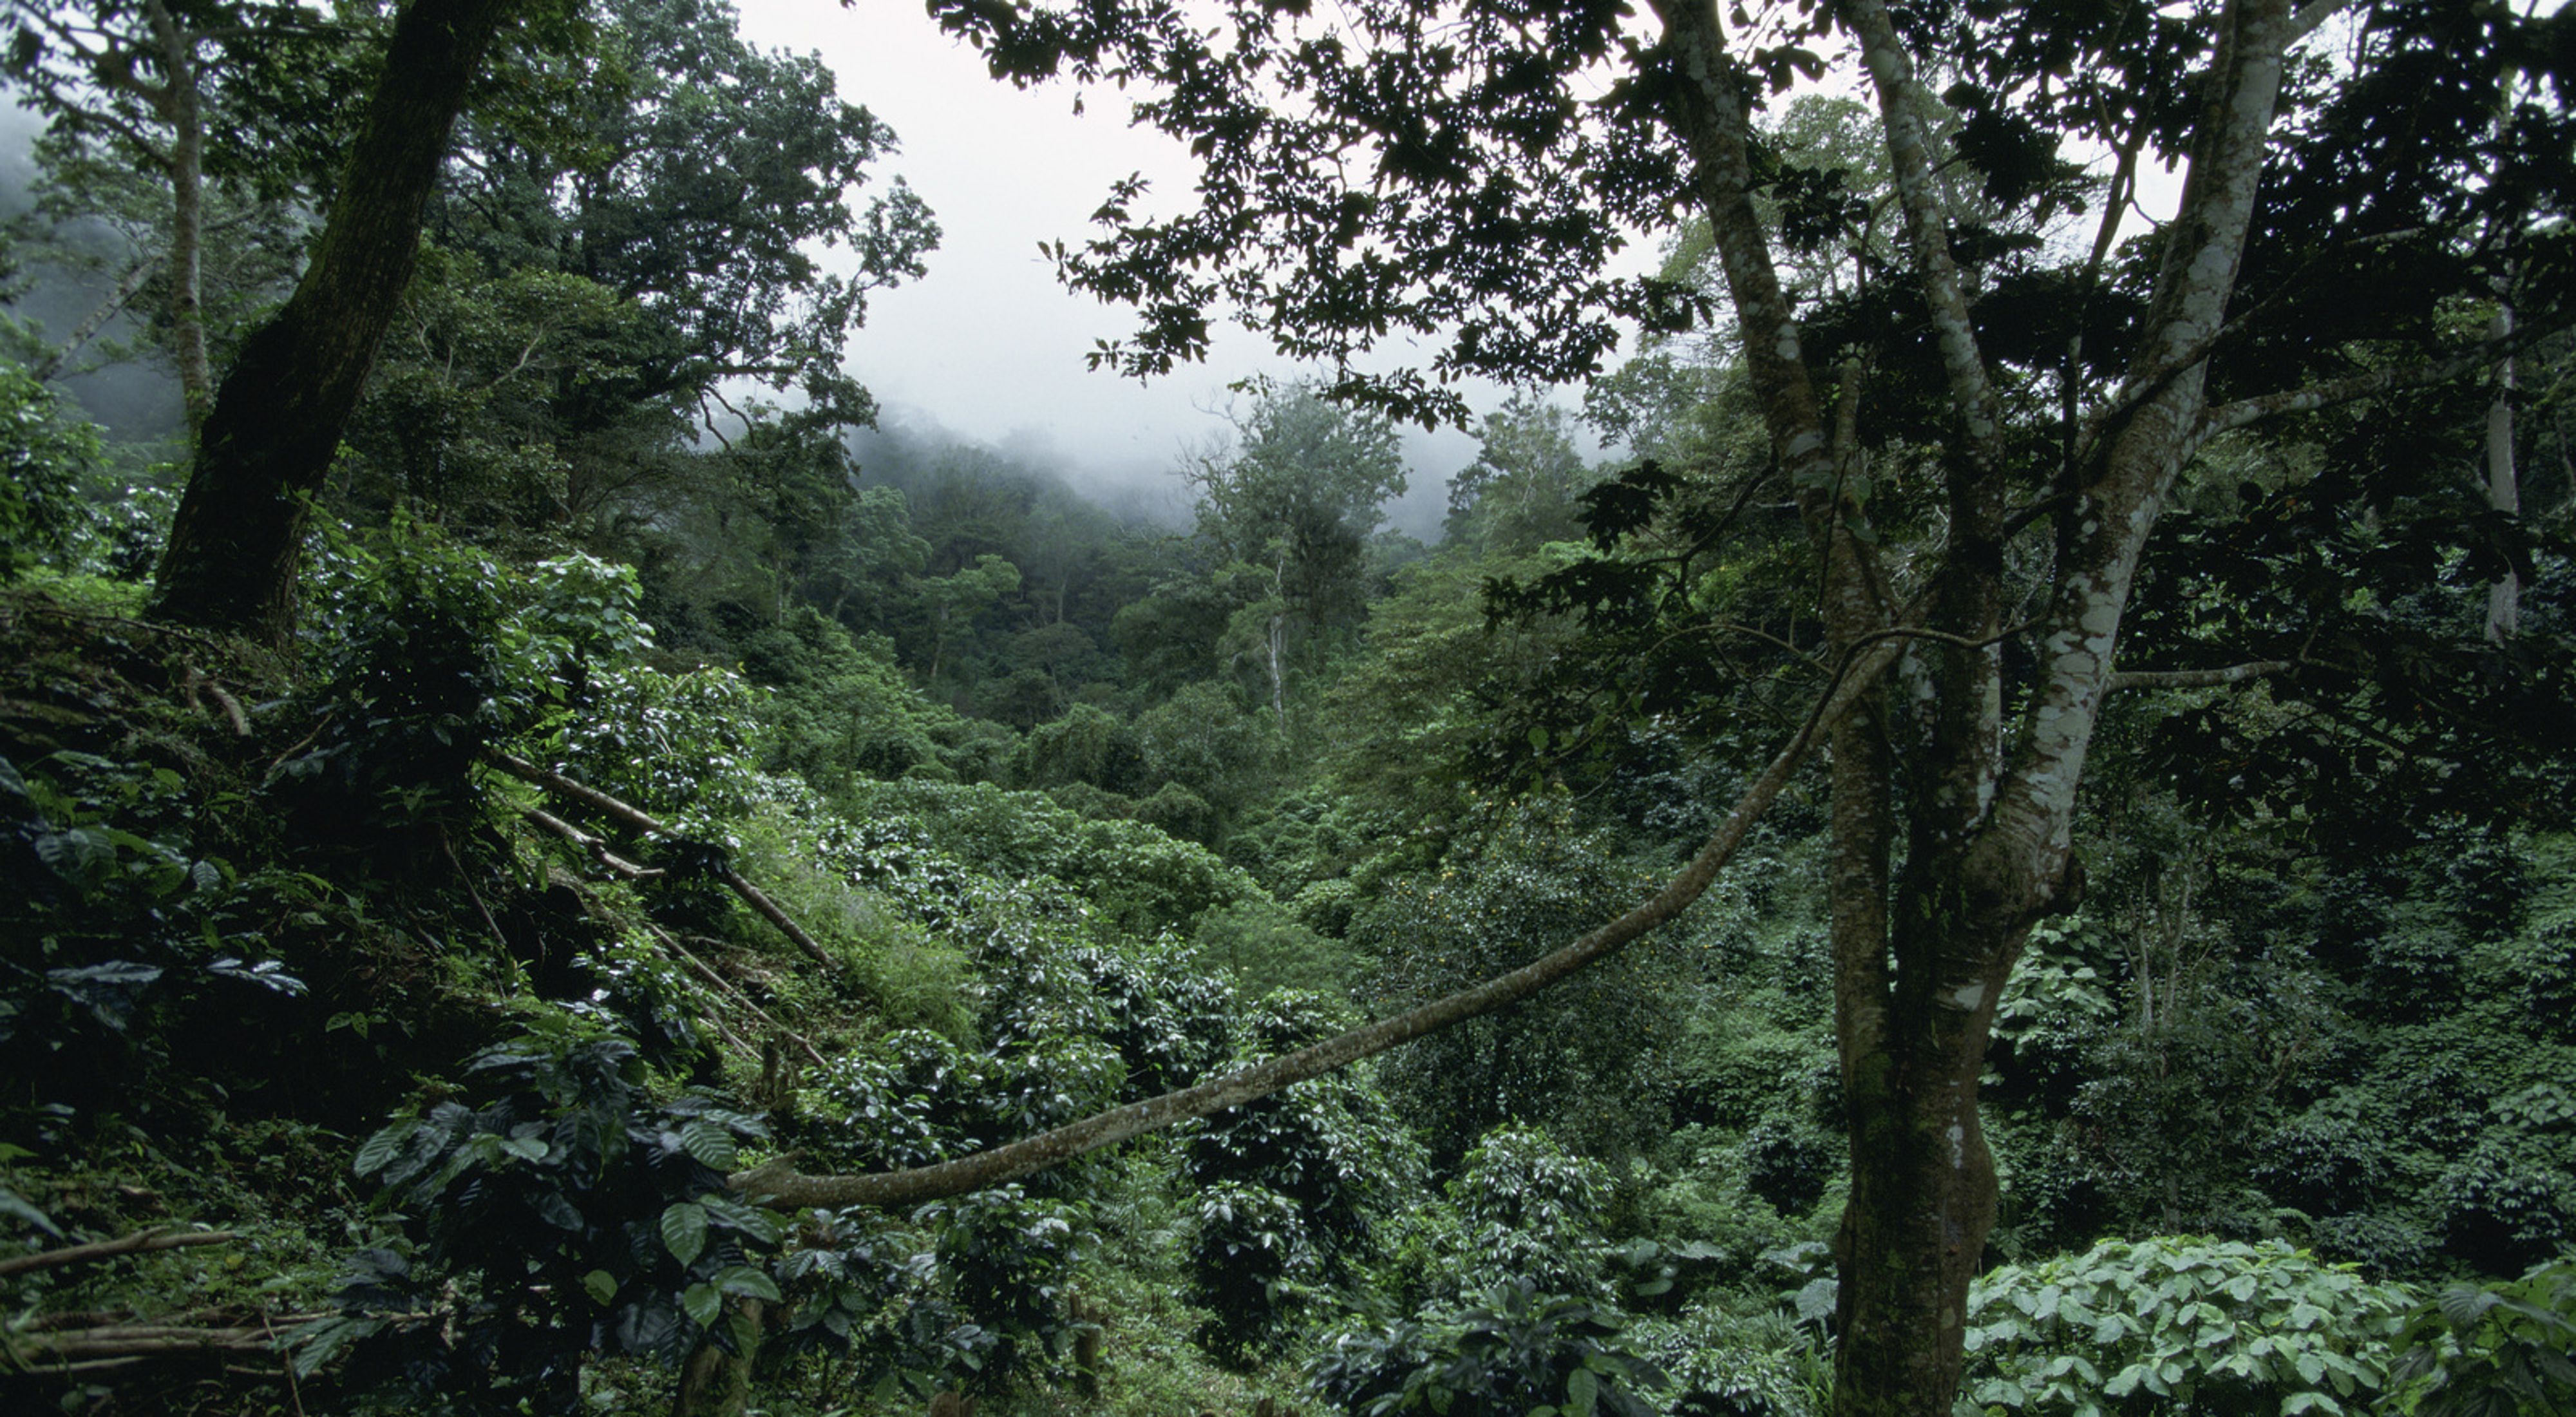 Clouds envelop the forest of the Sierra Madre watershed and Reserva de la Biosfera La Sepultura near Tres Picos and Pijijiapan; Chiapas, Mexico.  